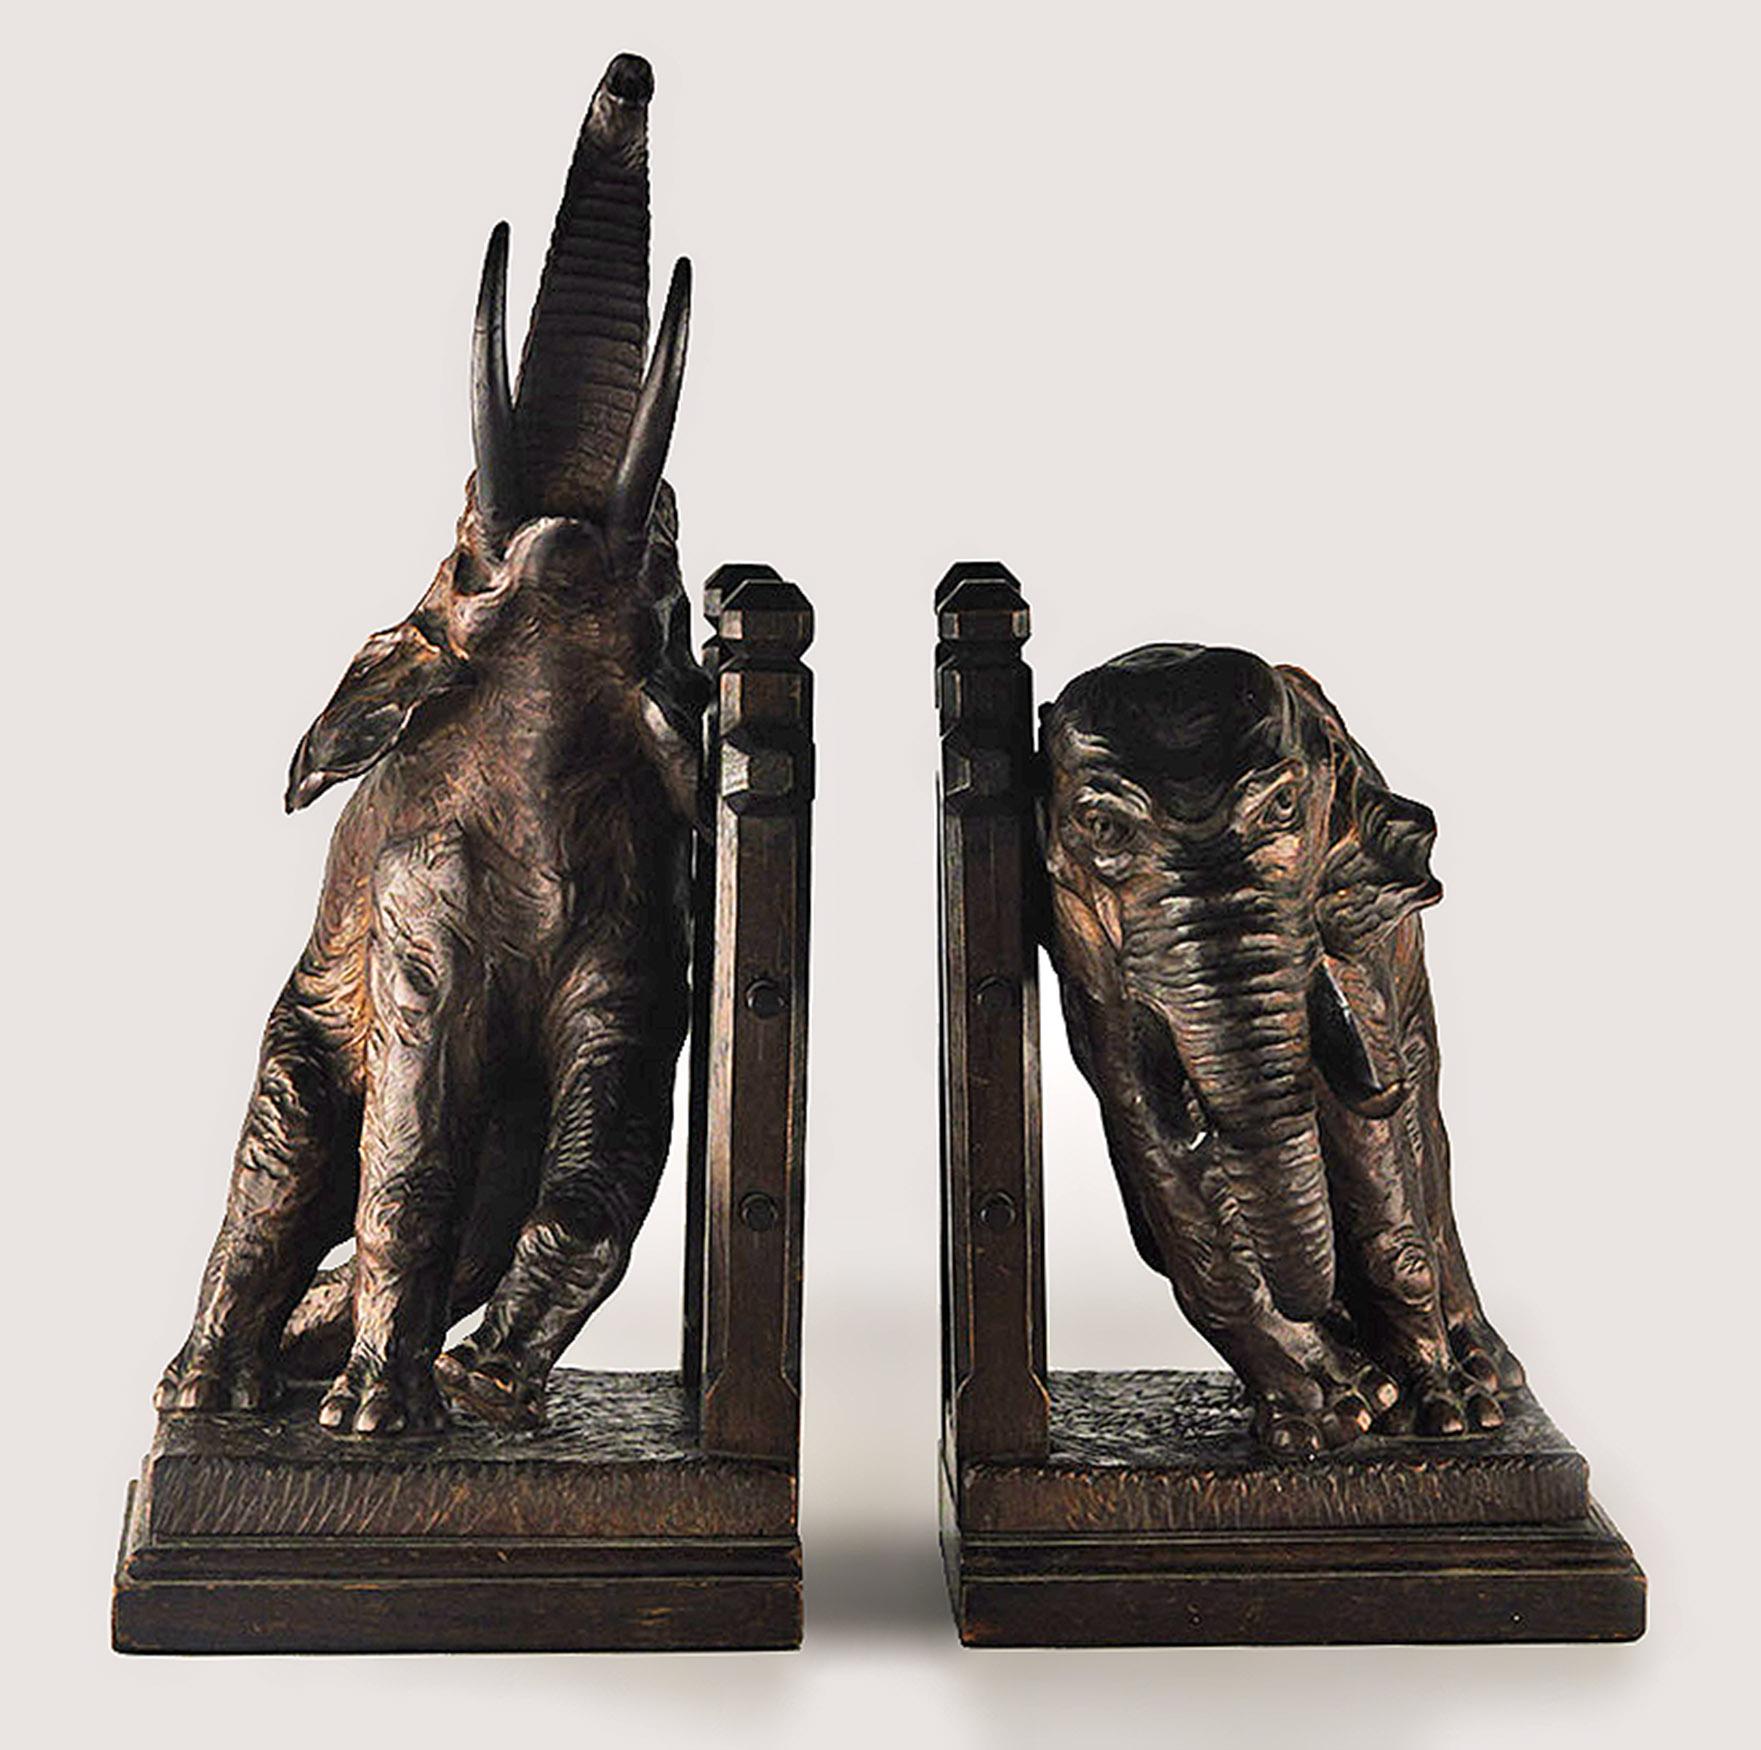 Art Deco Pair of Early 20th Century Hand-Crafted Wooden Elephant Bookends by Ary Bitter For Sale